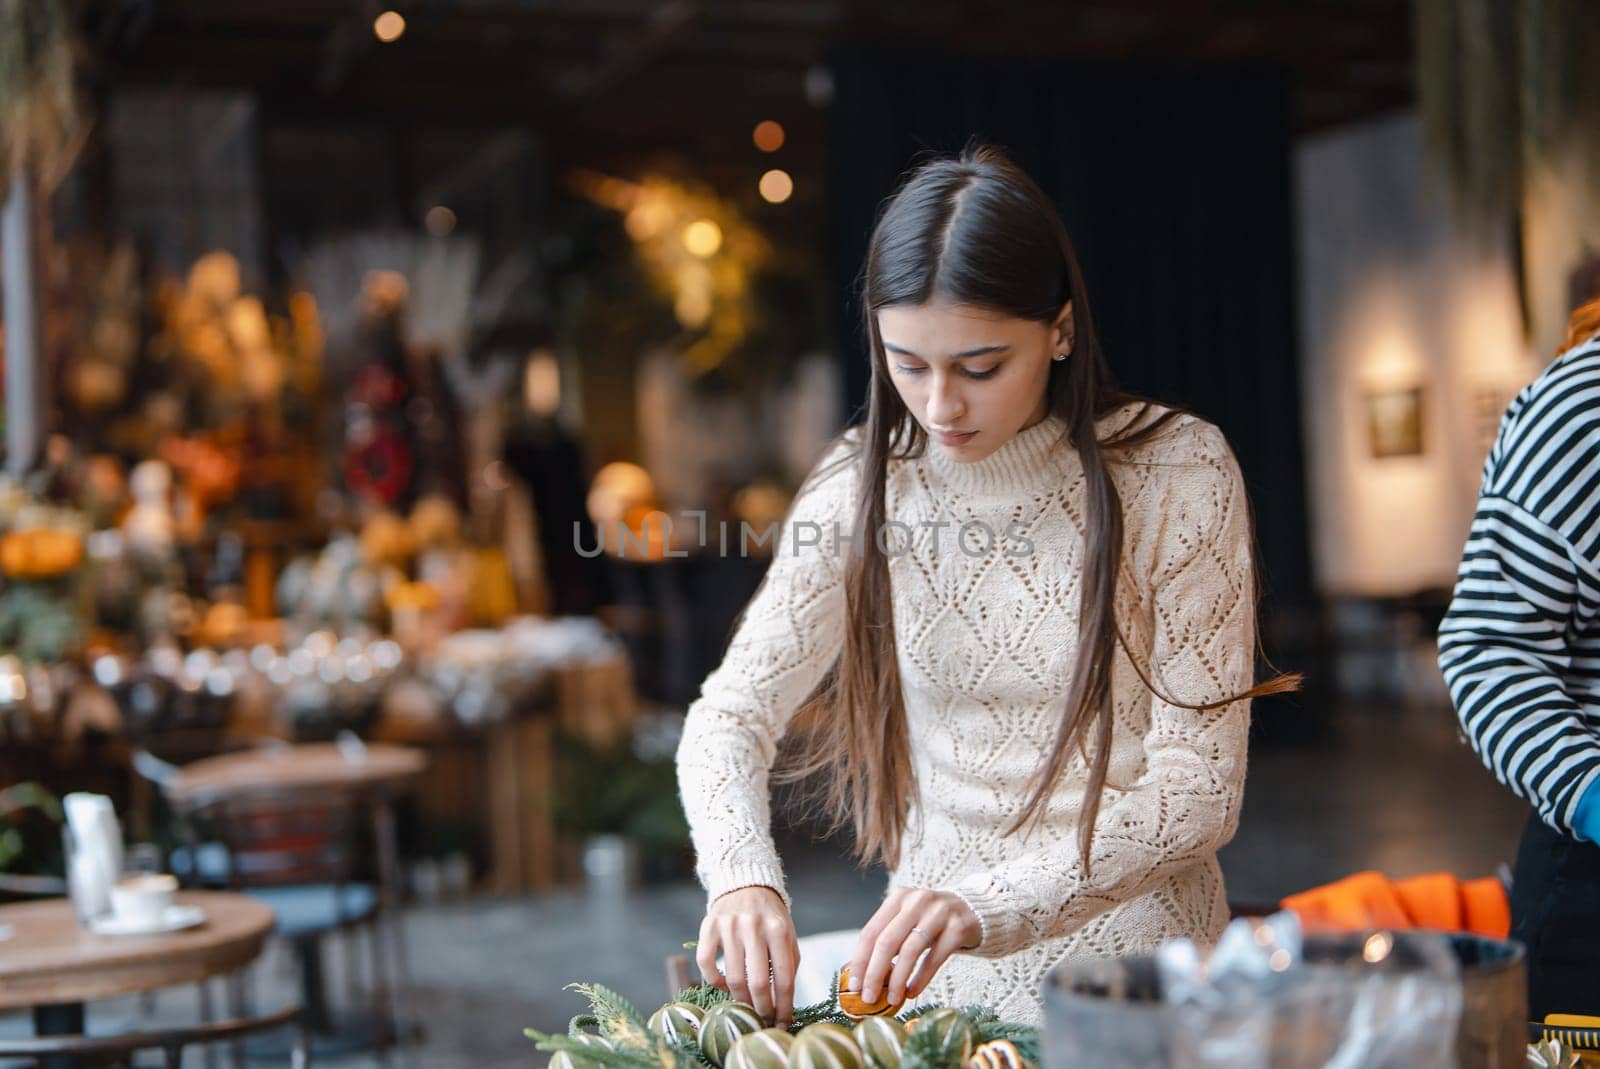 The last steps in completing the Christmas wreath at the flower shop counter. by teksomolika